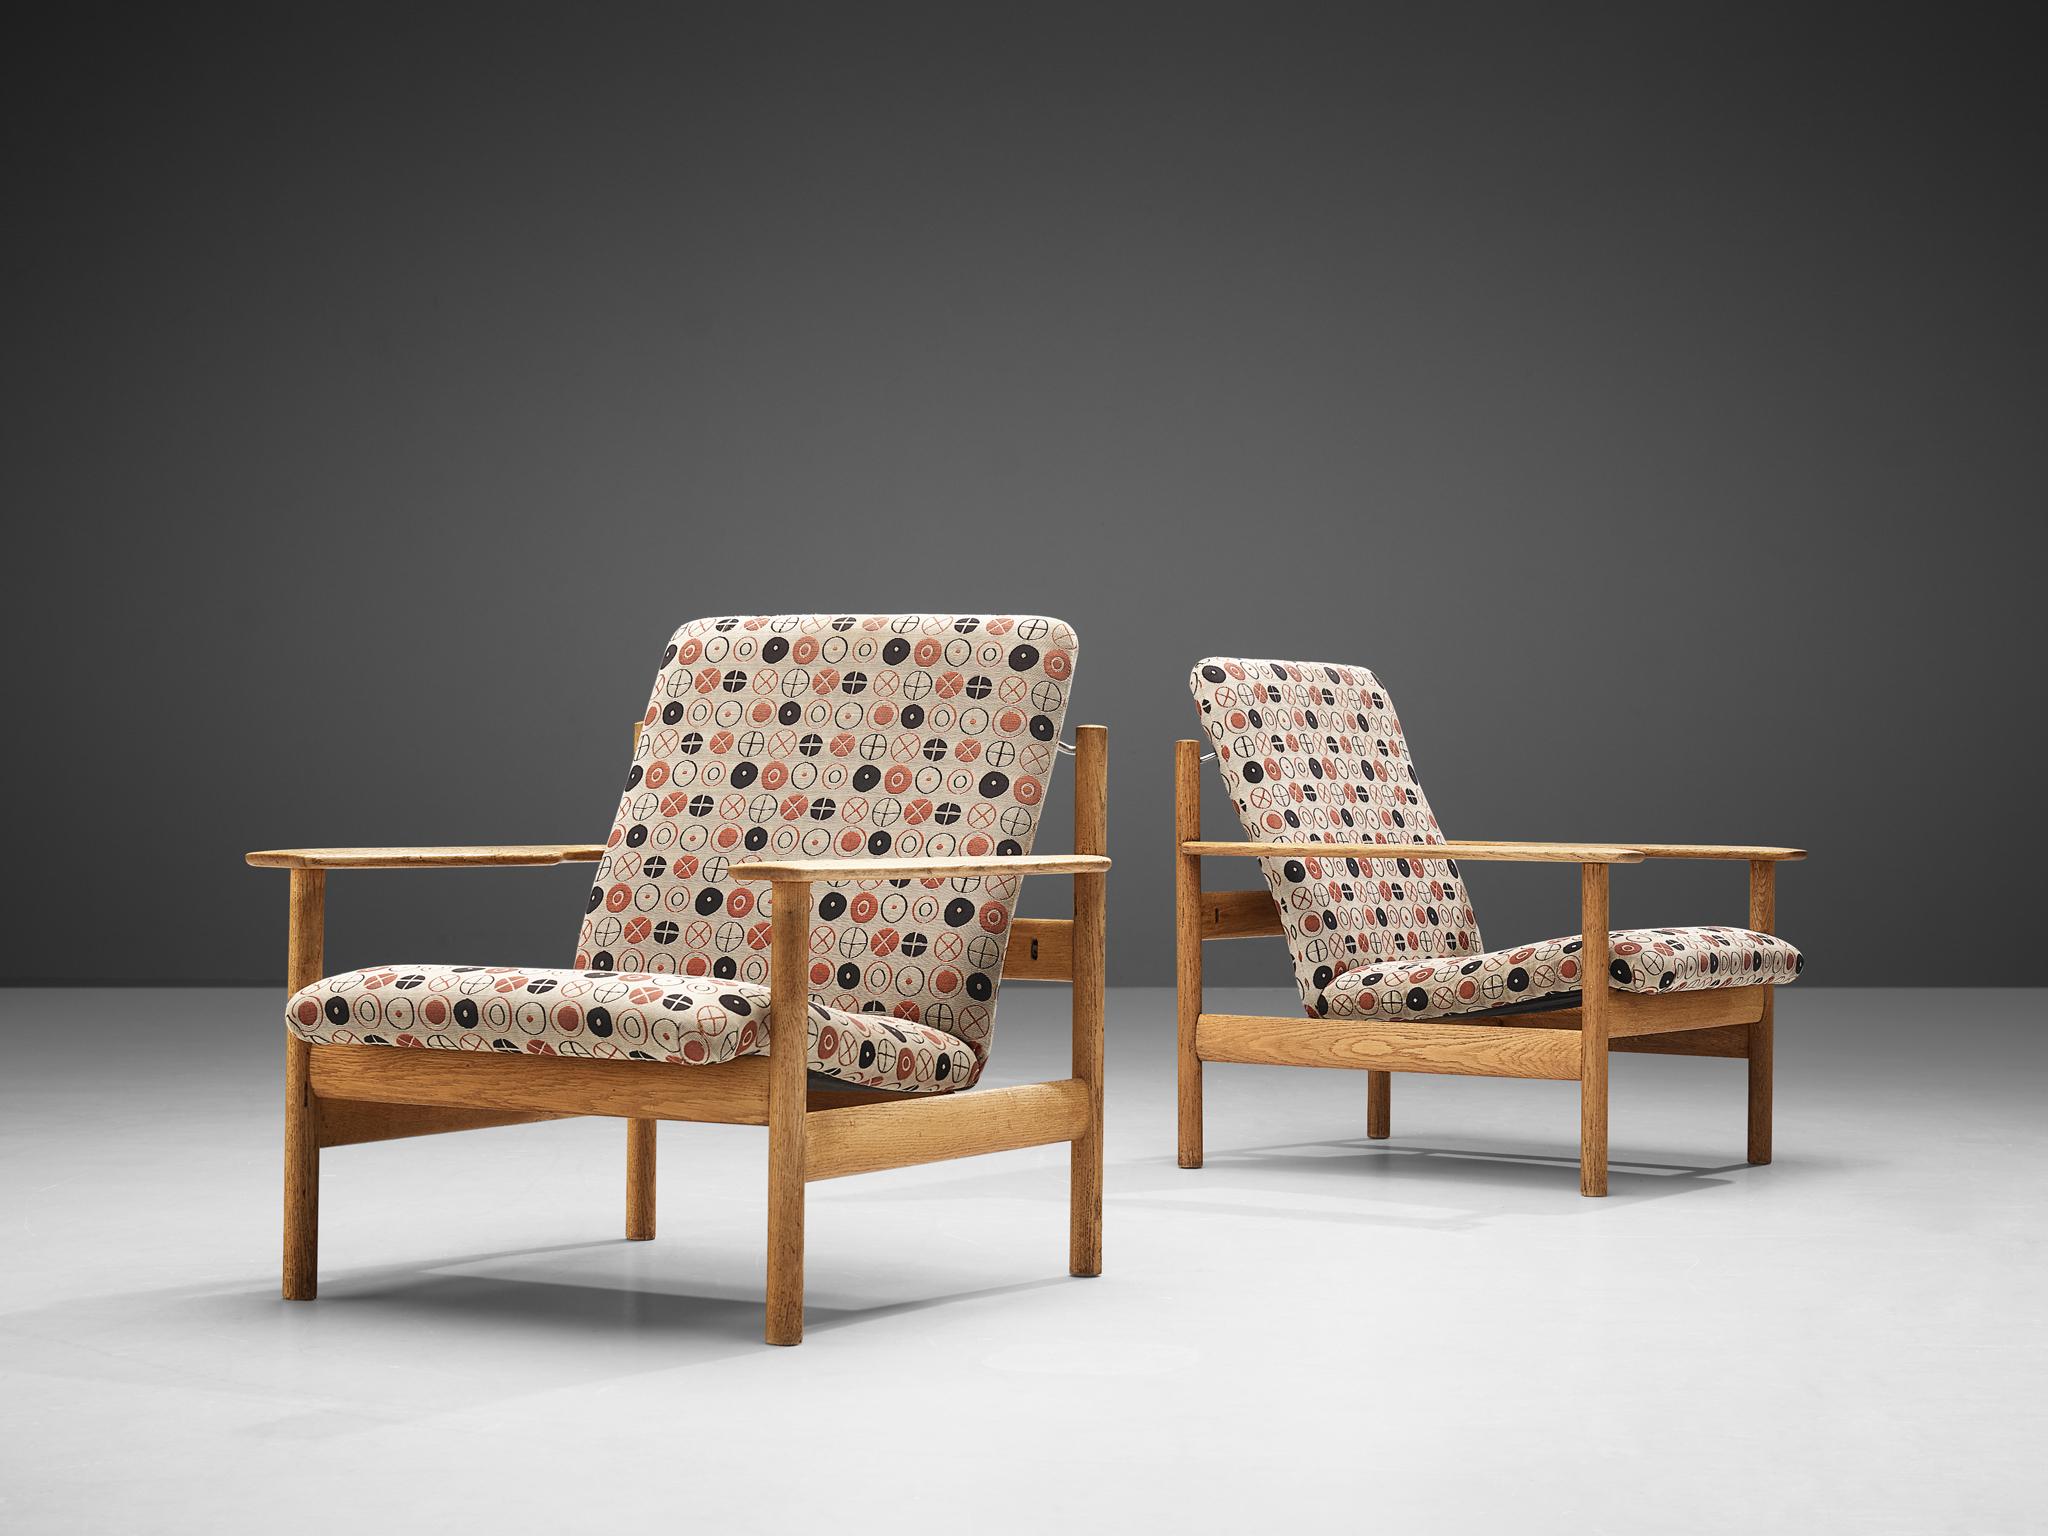 Sven Ivar Dysthe for Dokka Møbler, pair of lounge chairs model 1001, oak, fabric upholstery, Norway, 1960
Charles and Ray Eames, patterned fabric 'Circles', manufacturerd by Maharam, design 1947

This set of lounge chairs is designed by Sven Ivar